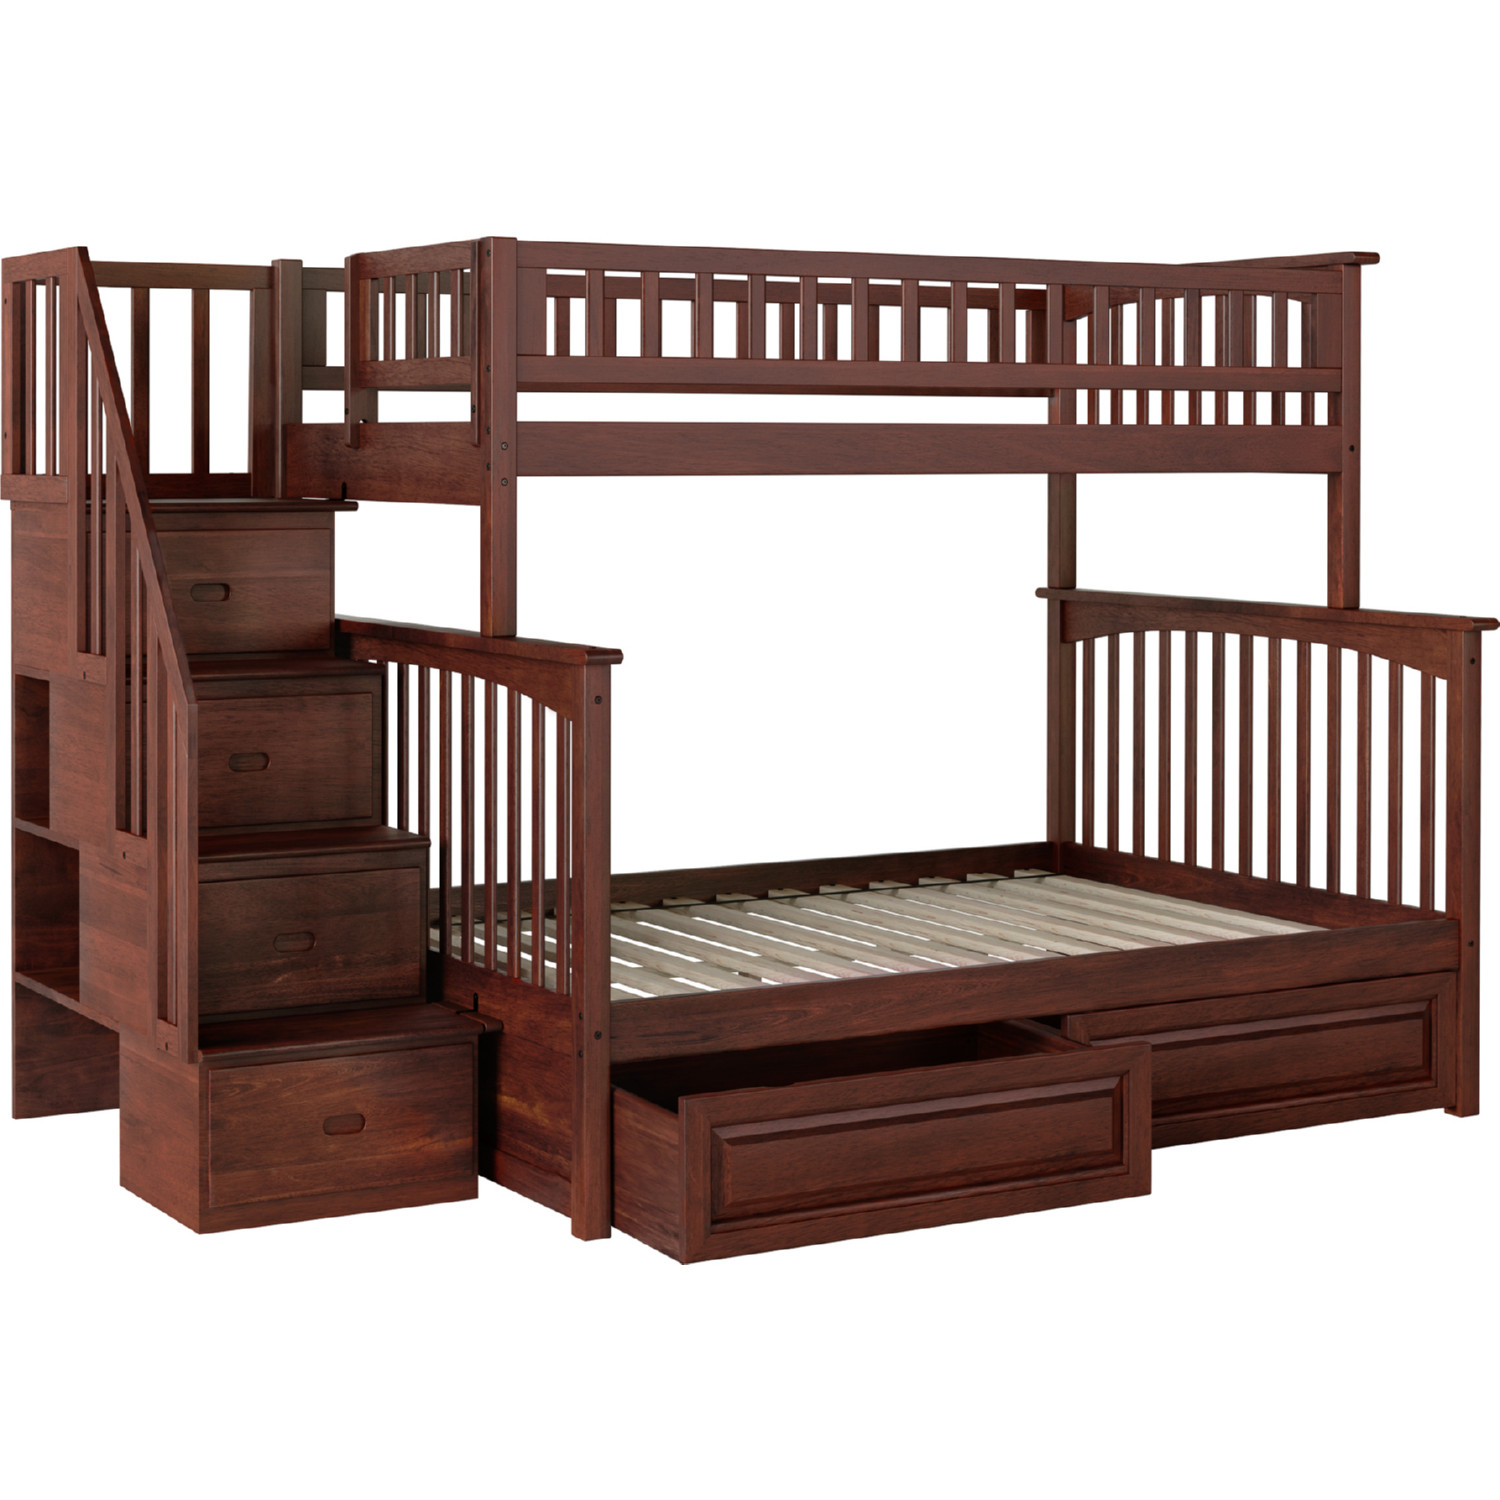 Columbia Staircase Bunk Bed Twin Over Full w/ 2 Raised Panel Drawers in Antique Walnut